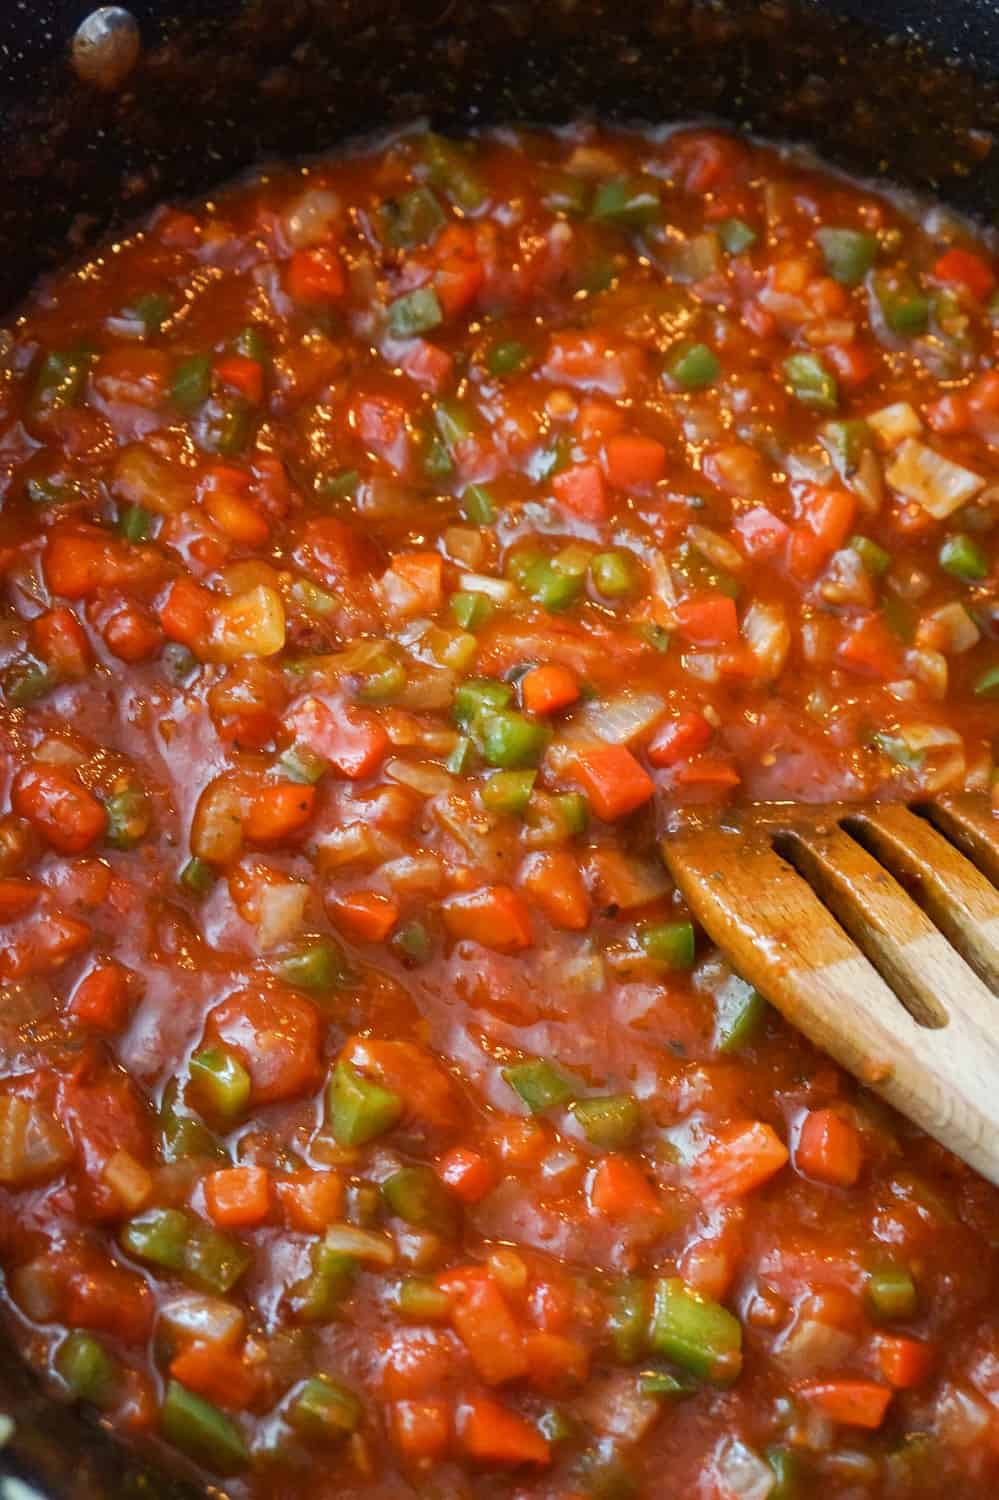 marinara sauce and diced peppers in a saute pan